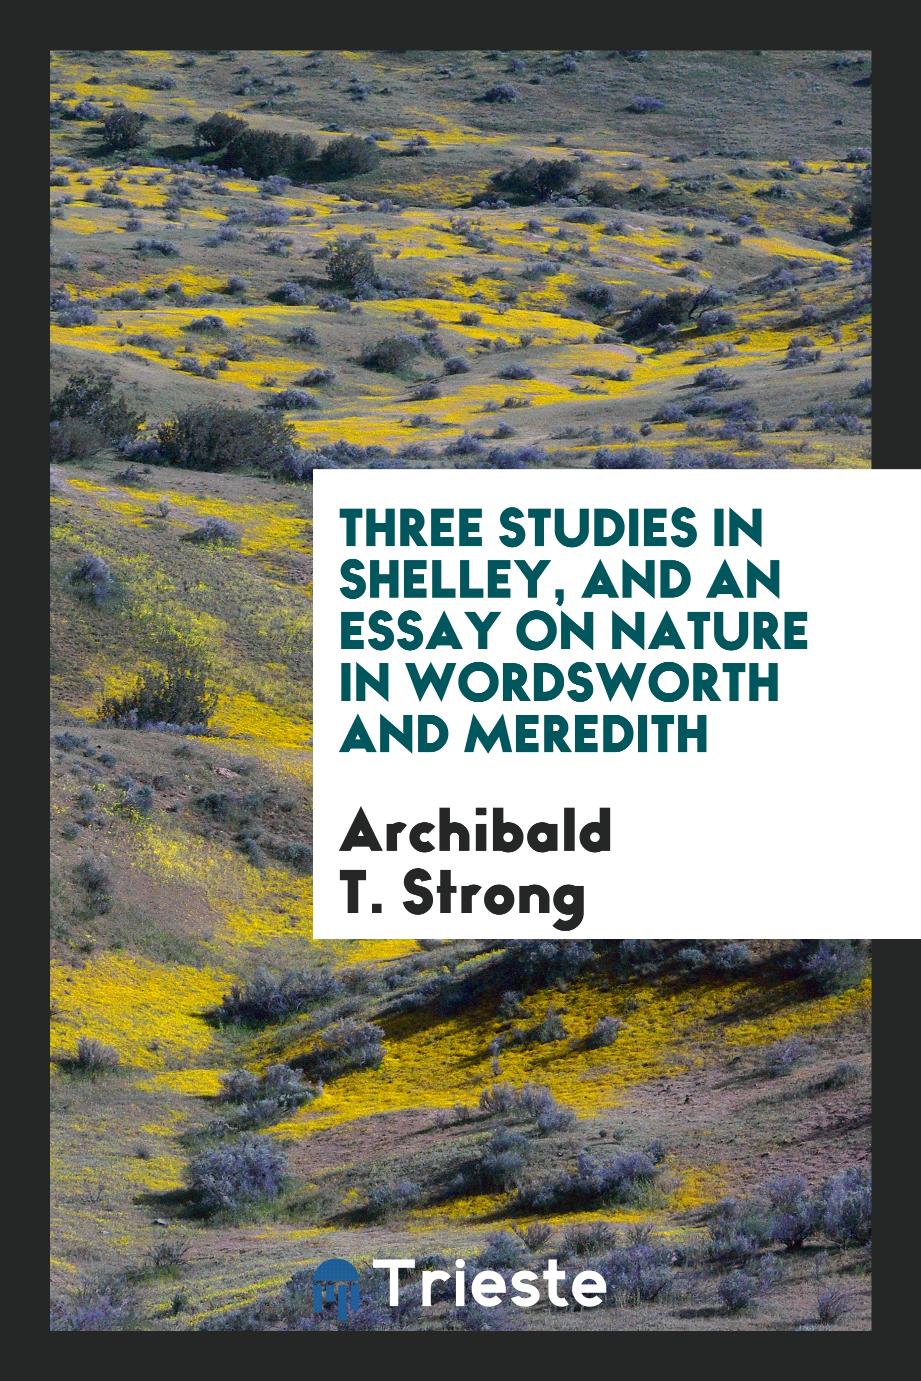 Three studies in Shelley, and an essay on nature in Wordsworth and Meredith